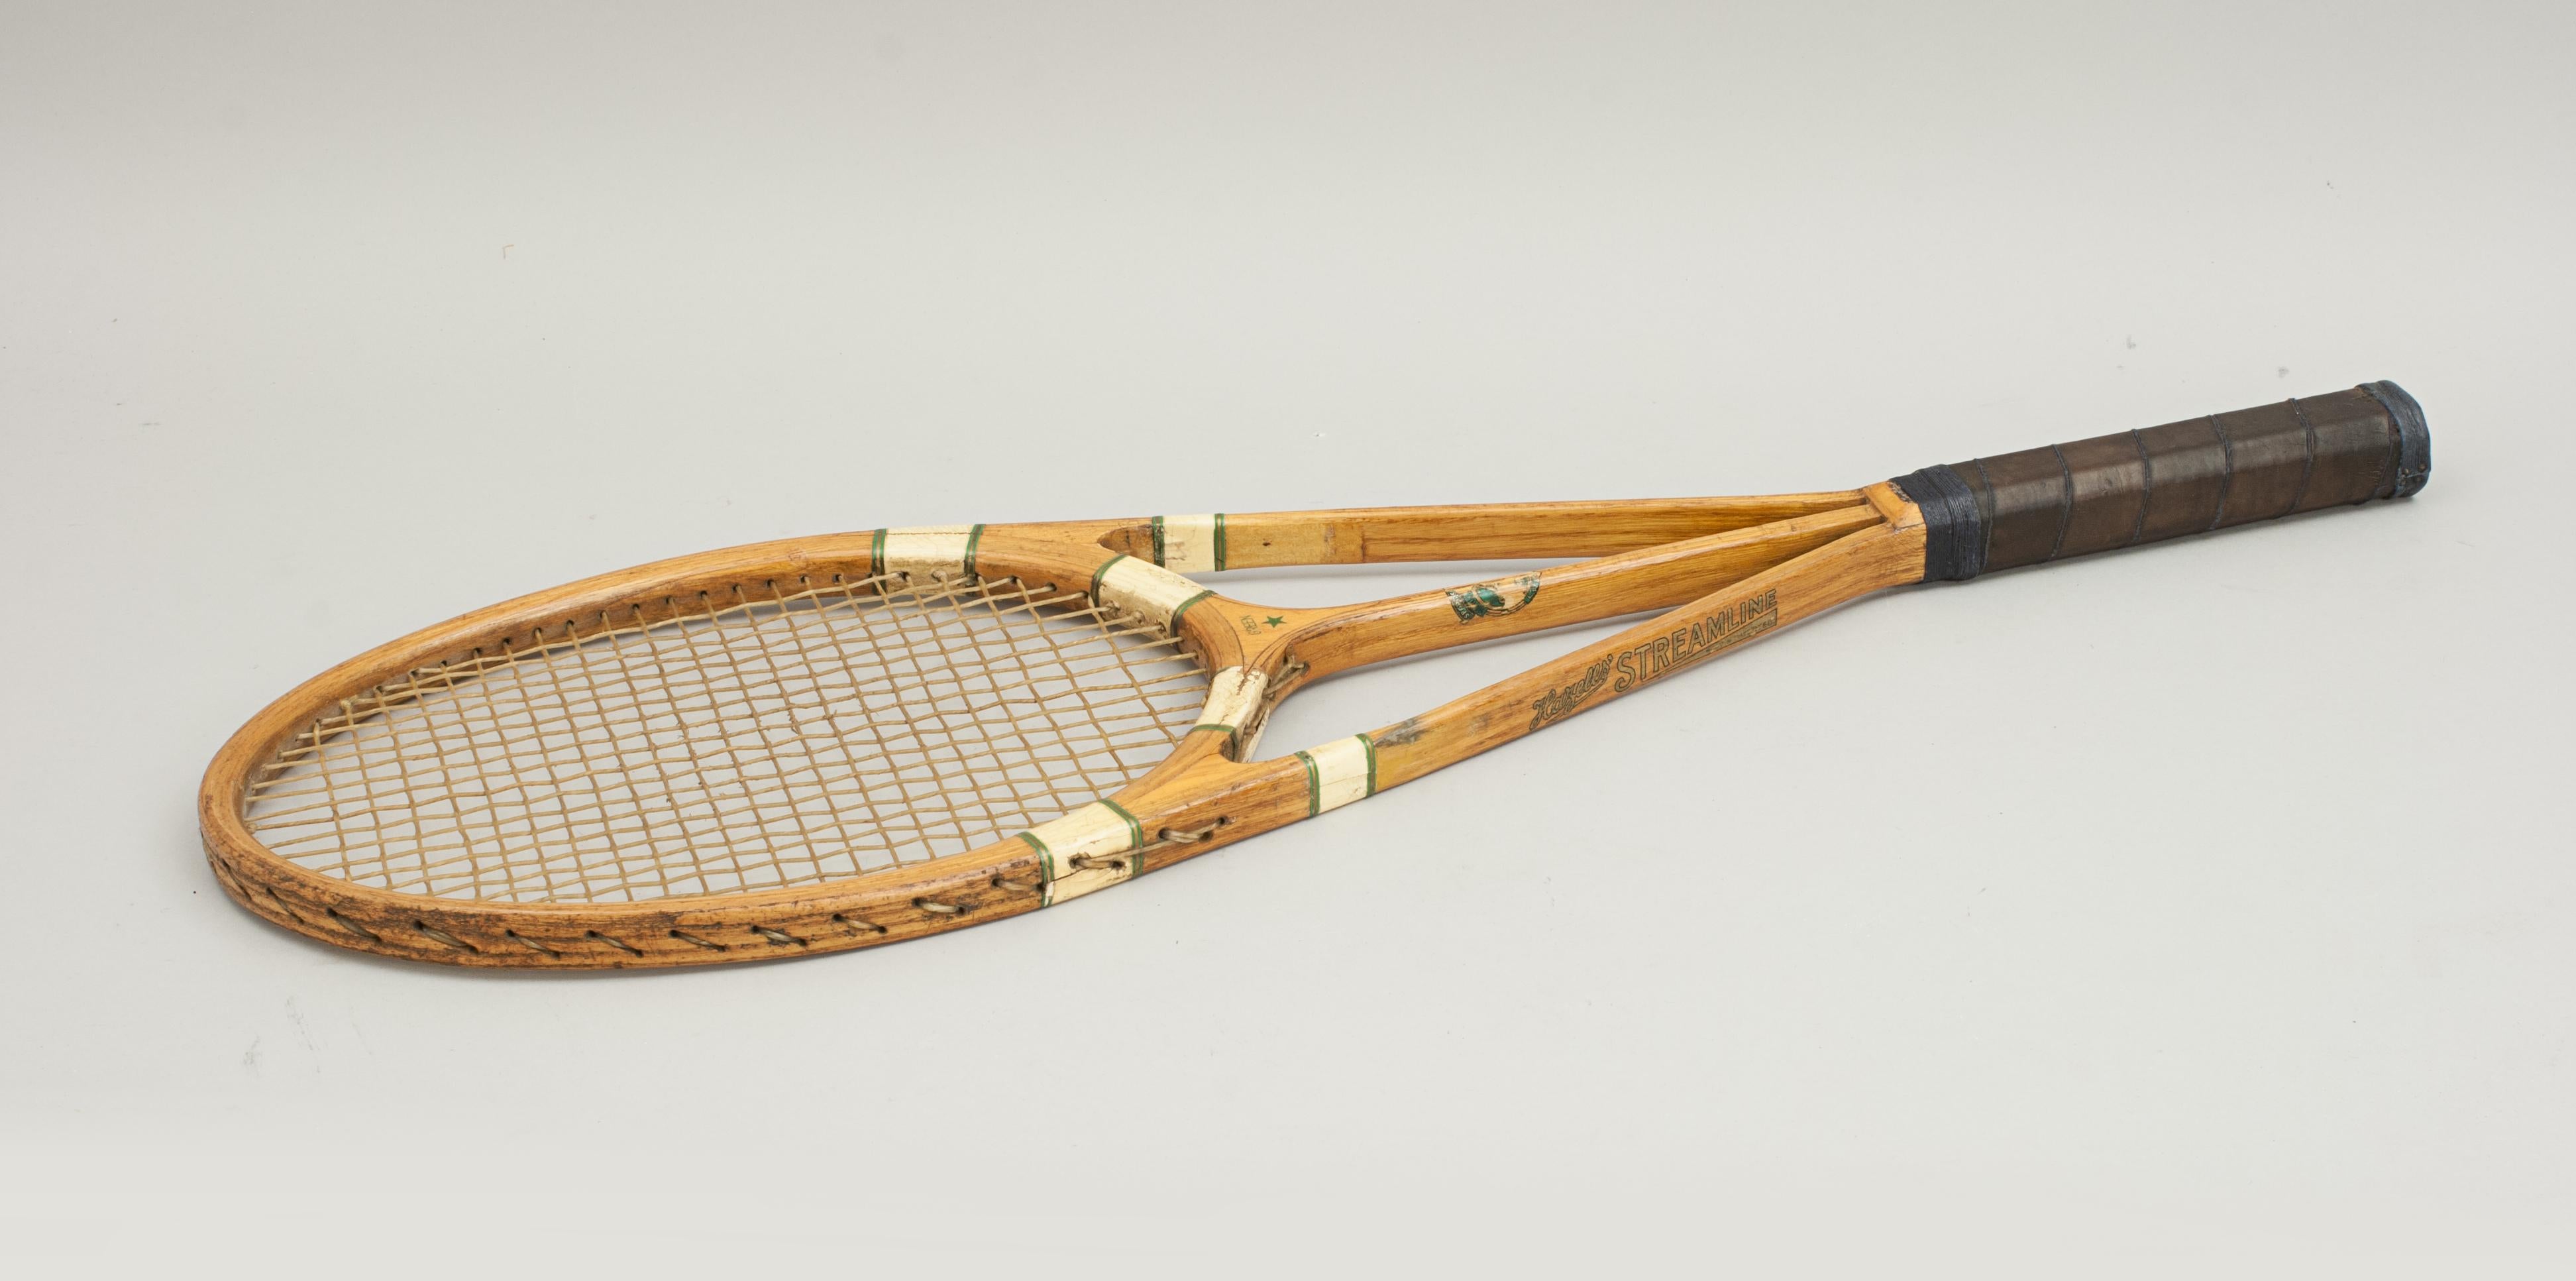 Hazell streamline tennis racket, green star.
A good triple branch green star streamline lawn tennis racket made by Hazells' of 111-113 Mare street, London E 8. The racket is in very good condition for its age, all transfers are bright in colour